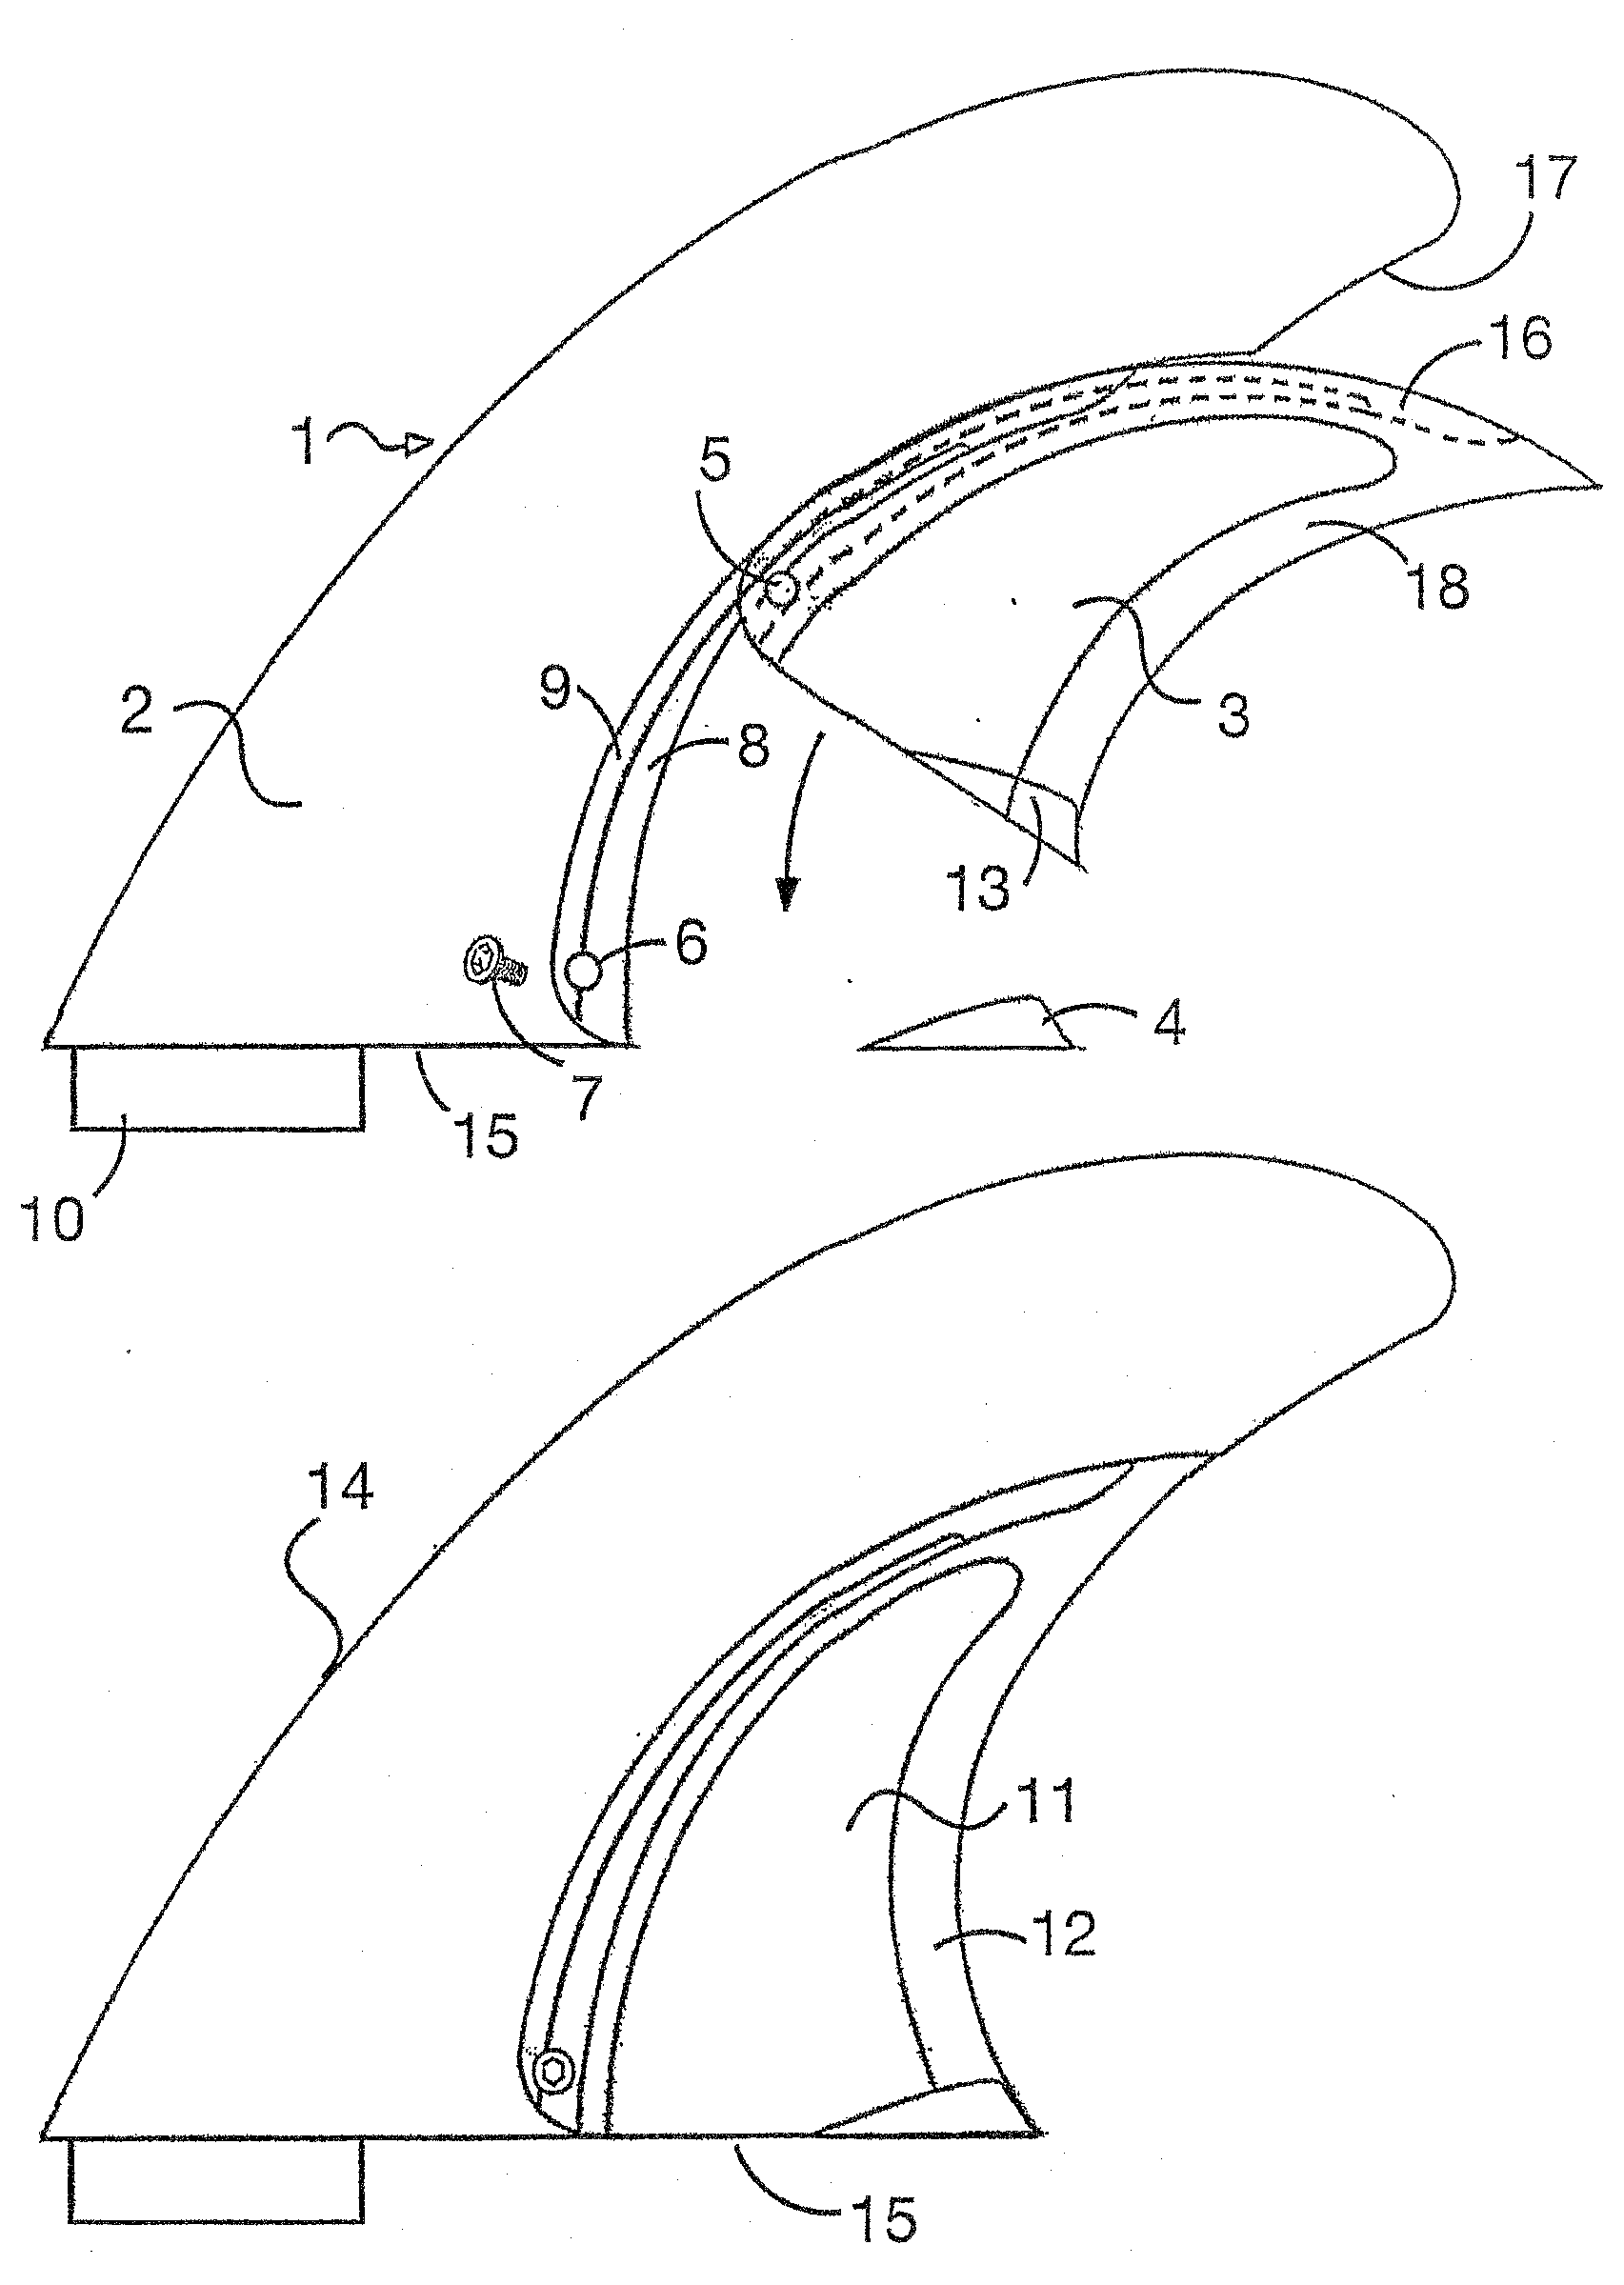 Fin or Keel with Flexible Portion for Surfboards, Sailboards of the Like